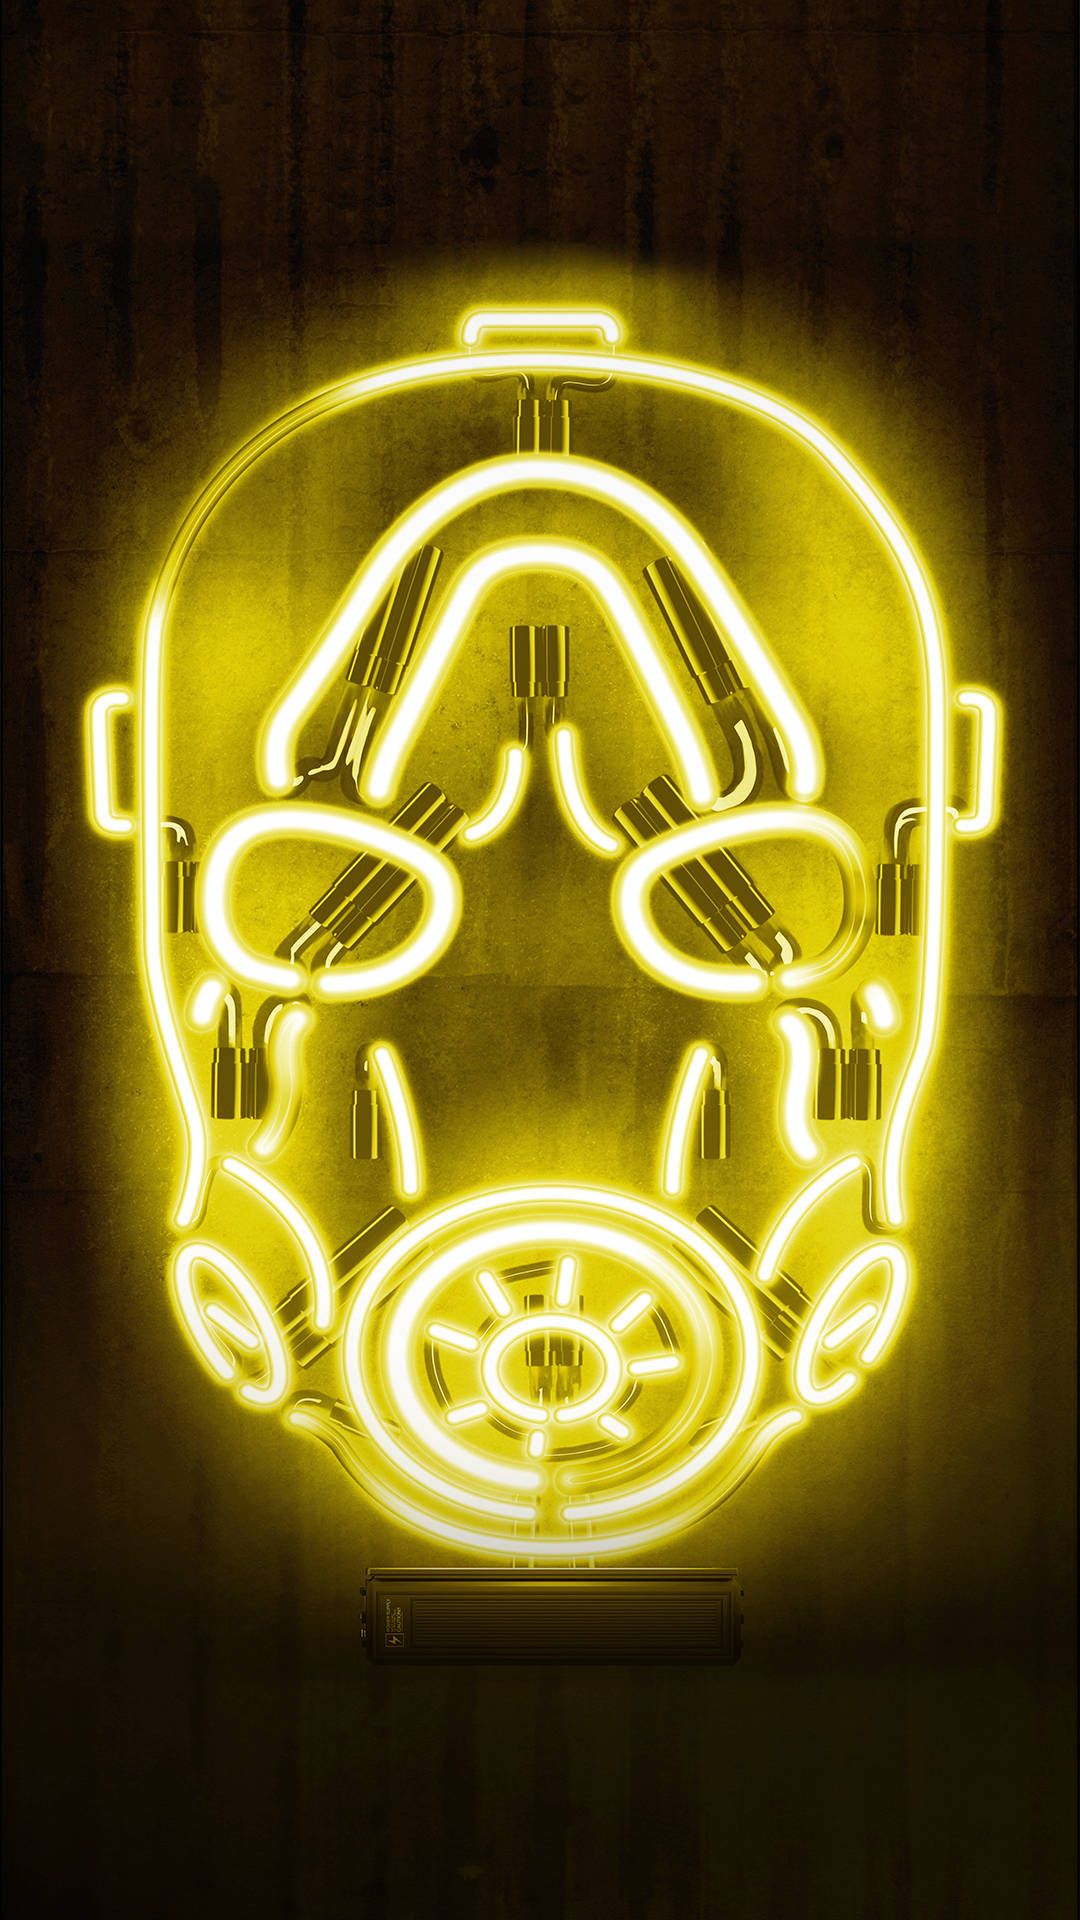 Get Ready To Save Pandora With The Borderlands Iphone Wallpaper